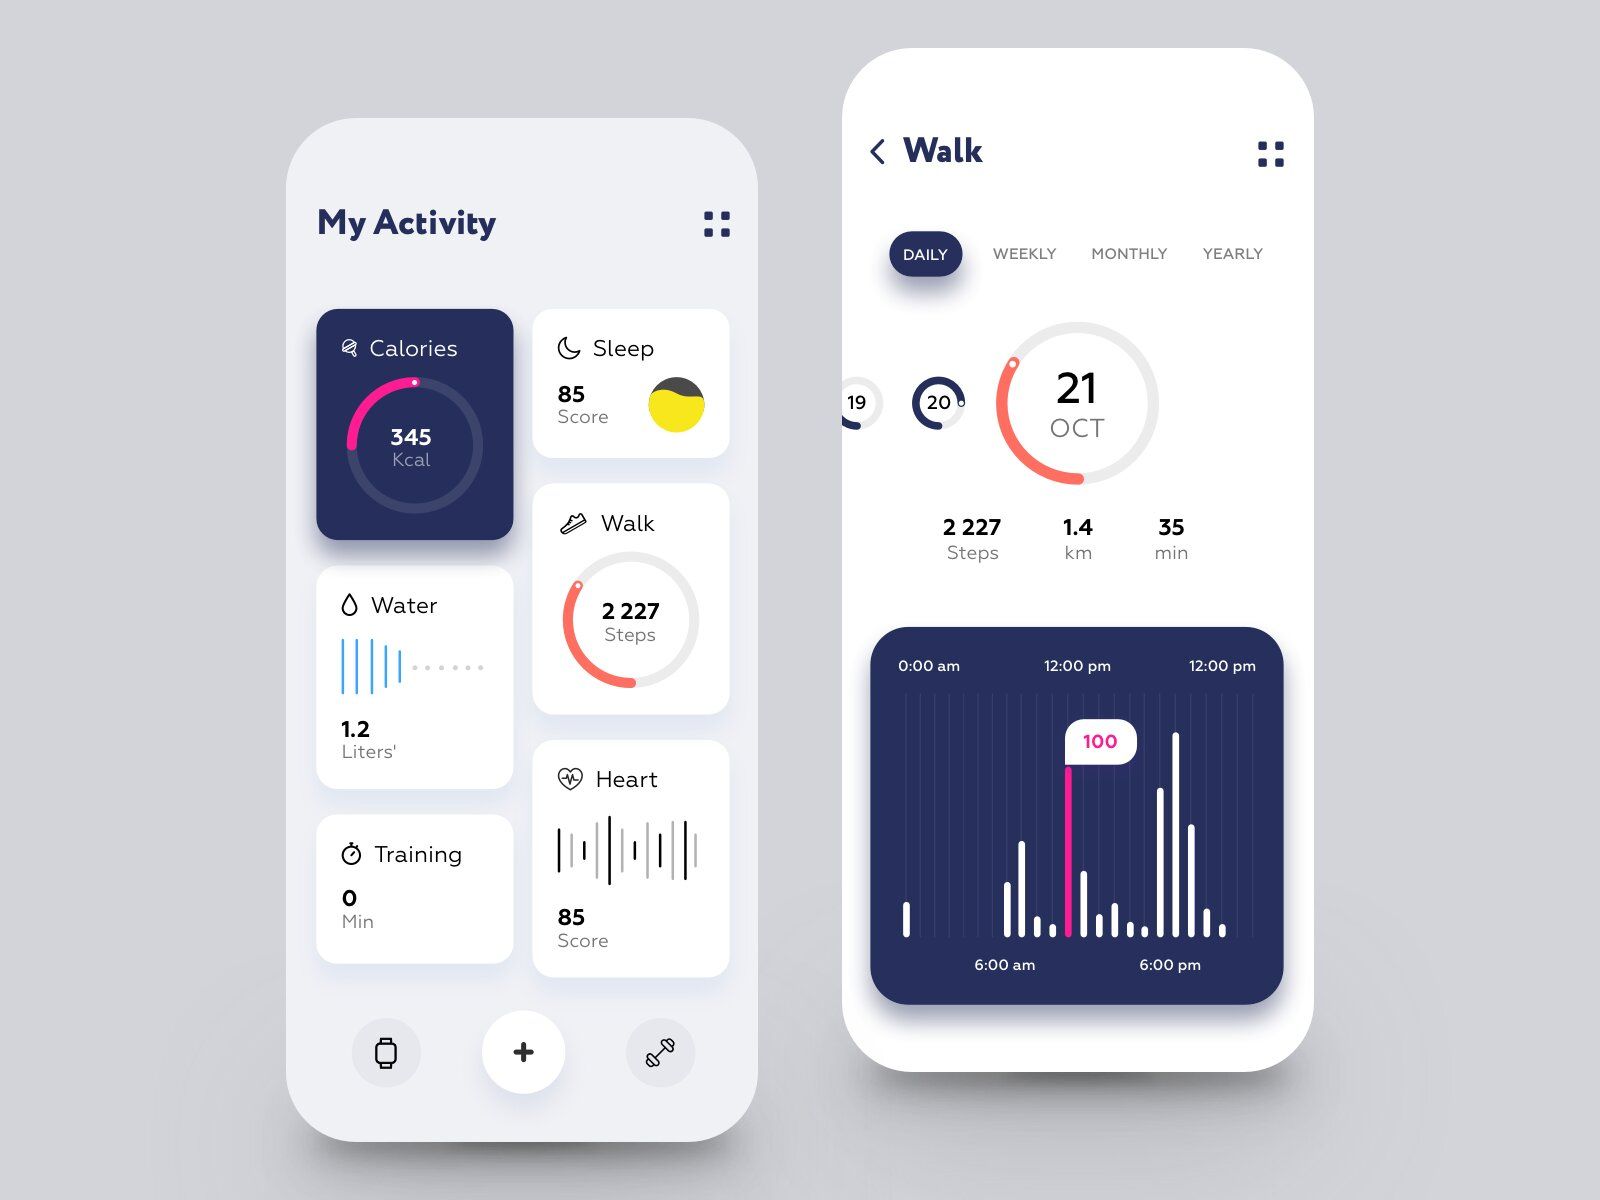 Such services can provide your app with different types of data: calories, steps, activity, etc. (*image by [Ann Negrebetskaya](https://dribbble.com/goodnightann){ rel="nofollow" .default-md}*)